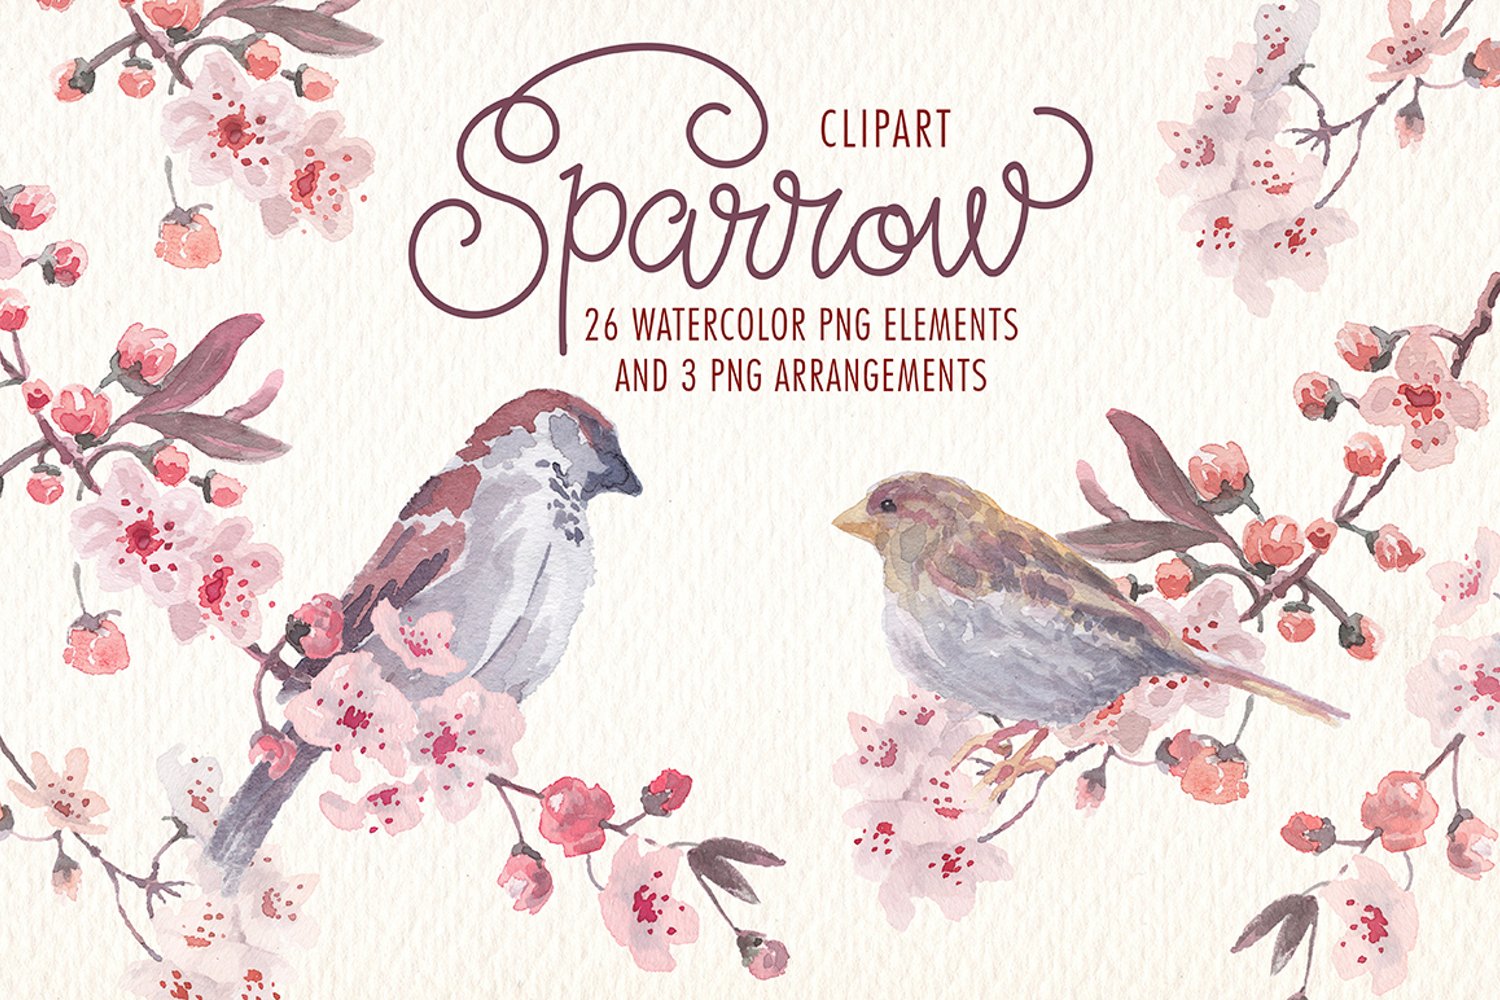 This set includes 26 watercolor png elements and 3 PNG arrangements.